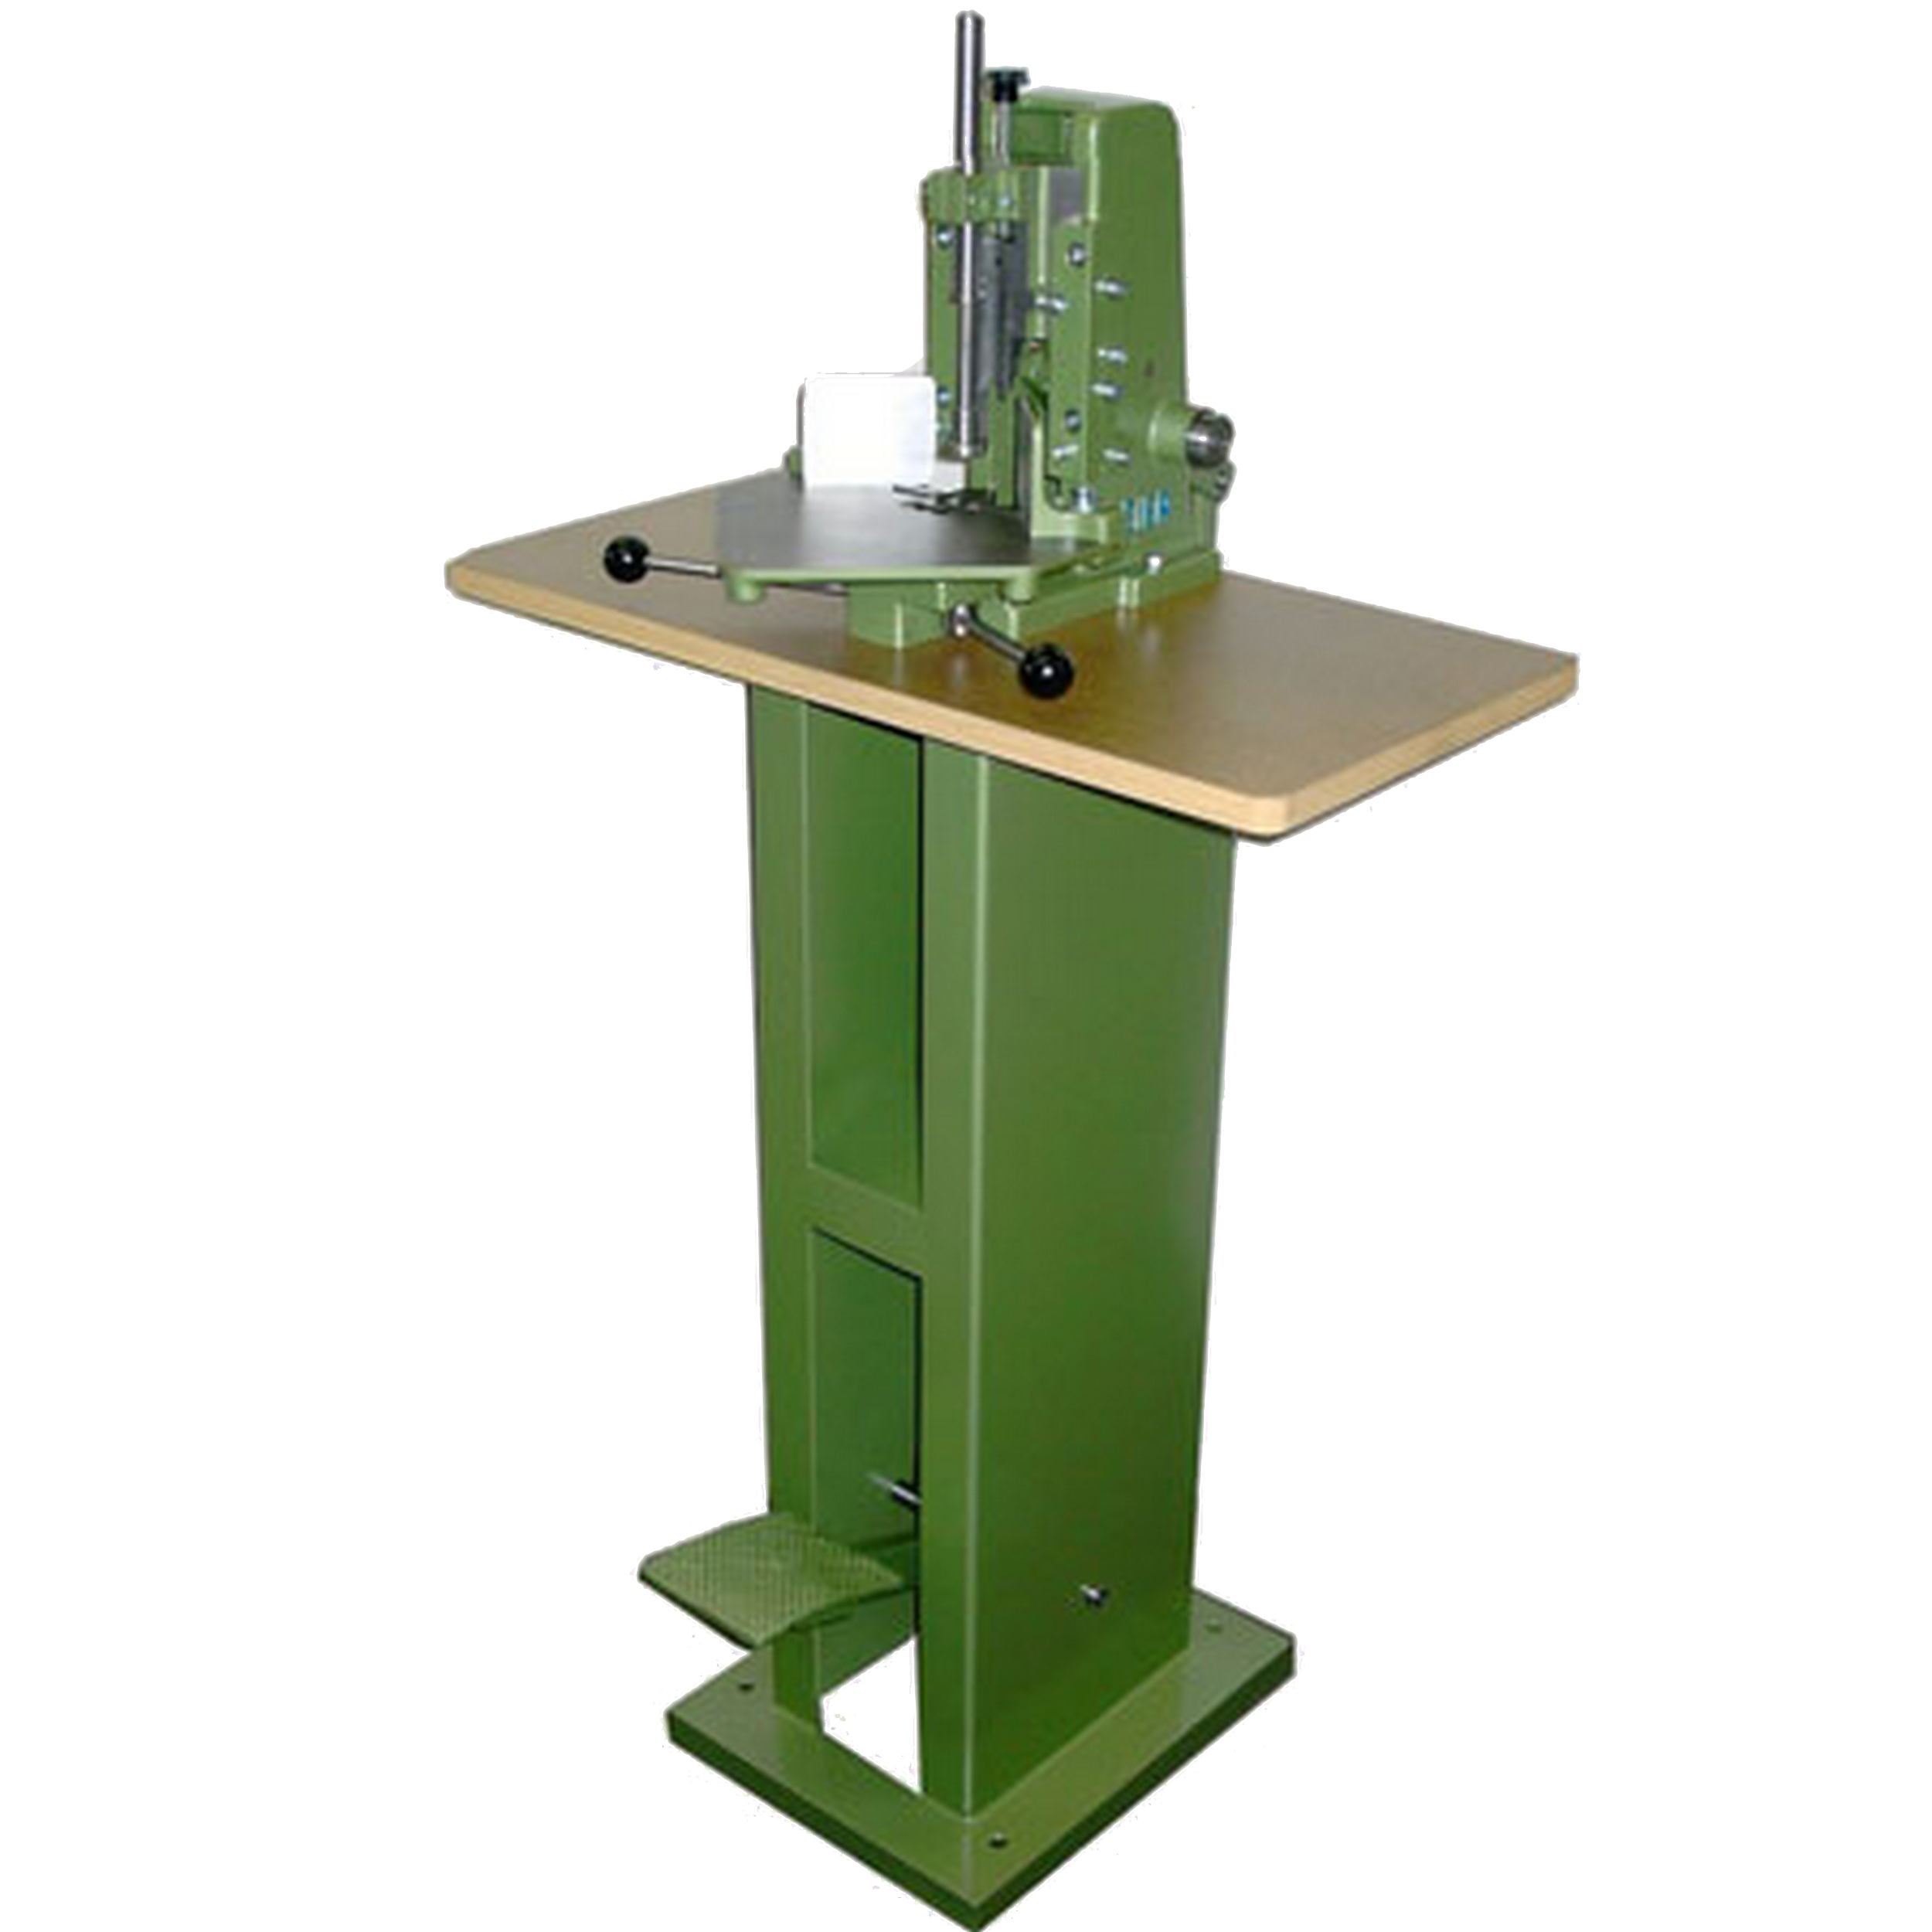 Corner-rounding machine Type UER/F - foot-operated - to cut off the corners of e. g. business cards...